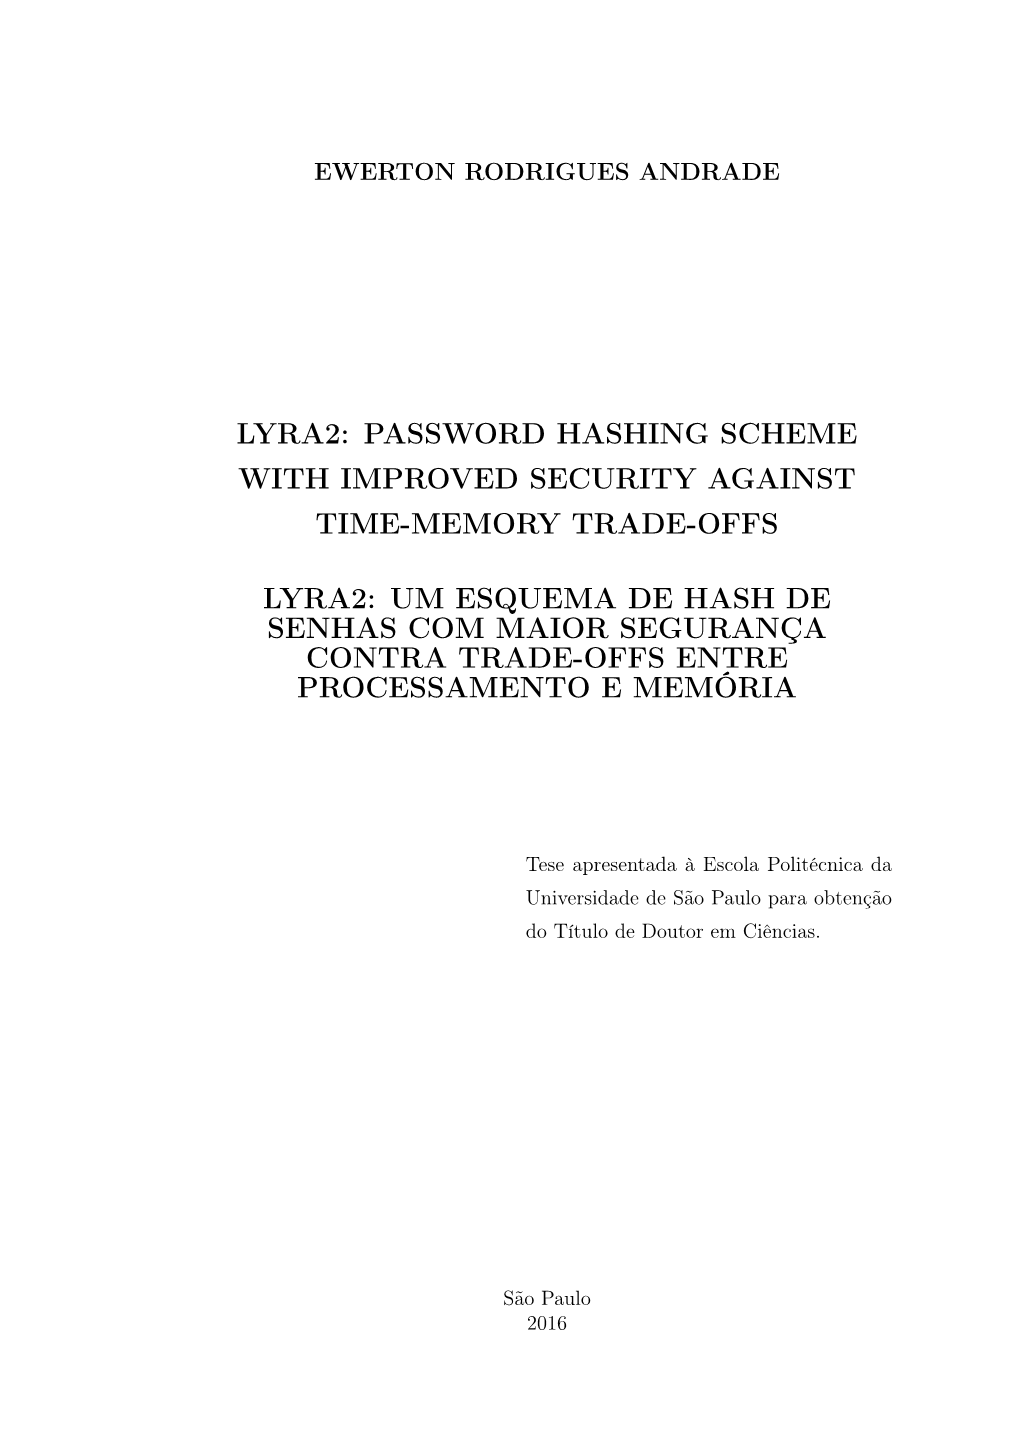 Lyra2: Password Hashing Scheme with Improved Security Against Time-Memory Trade-Offs